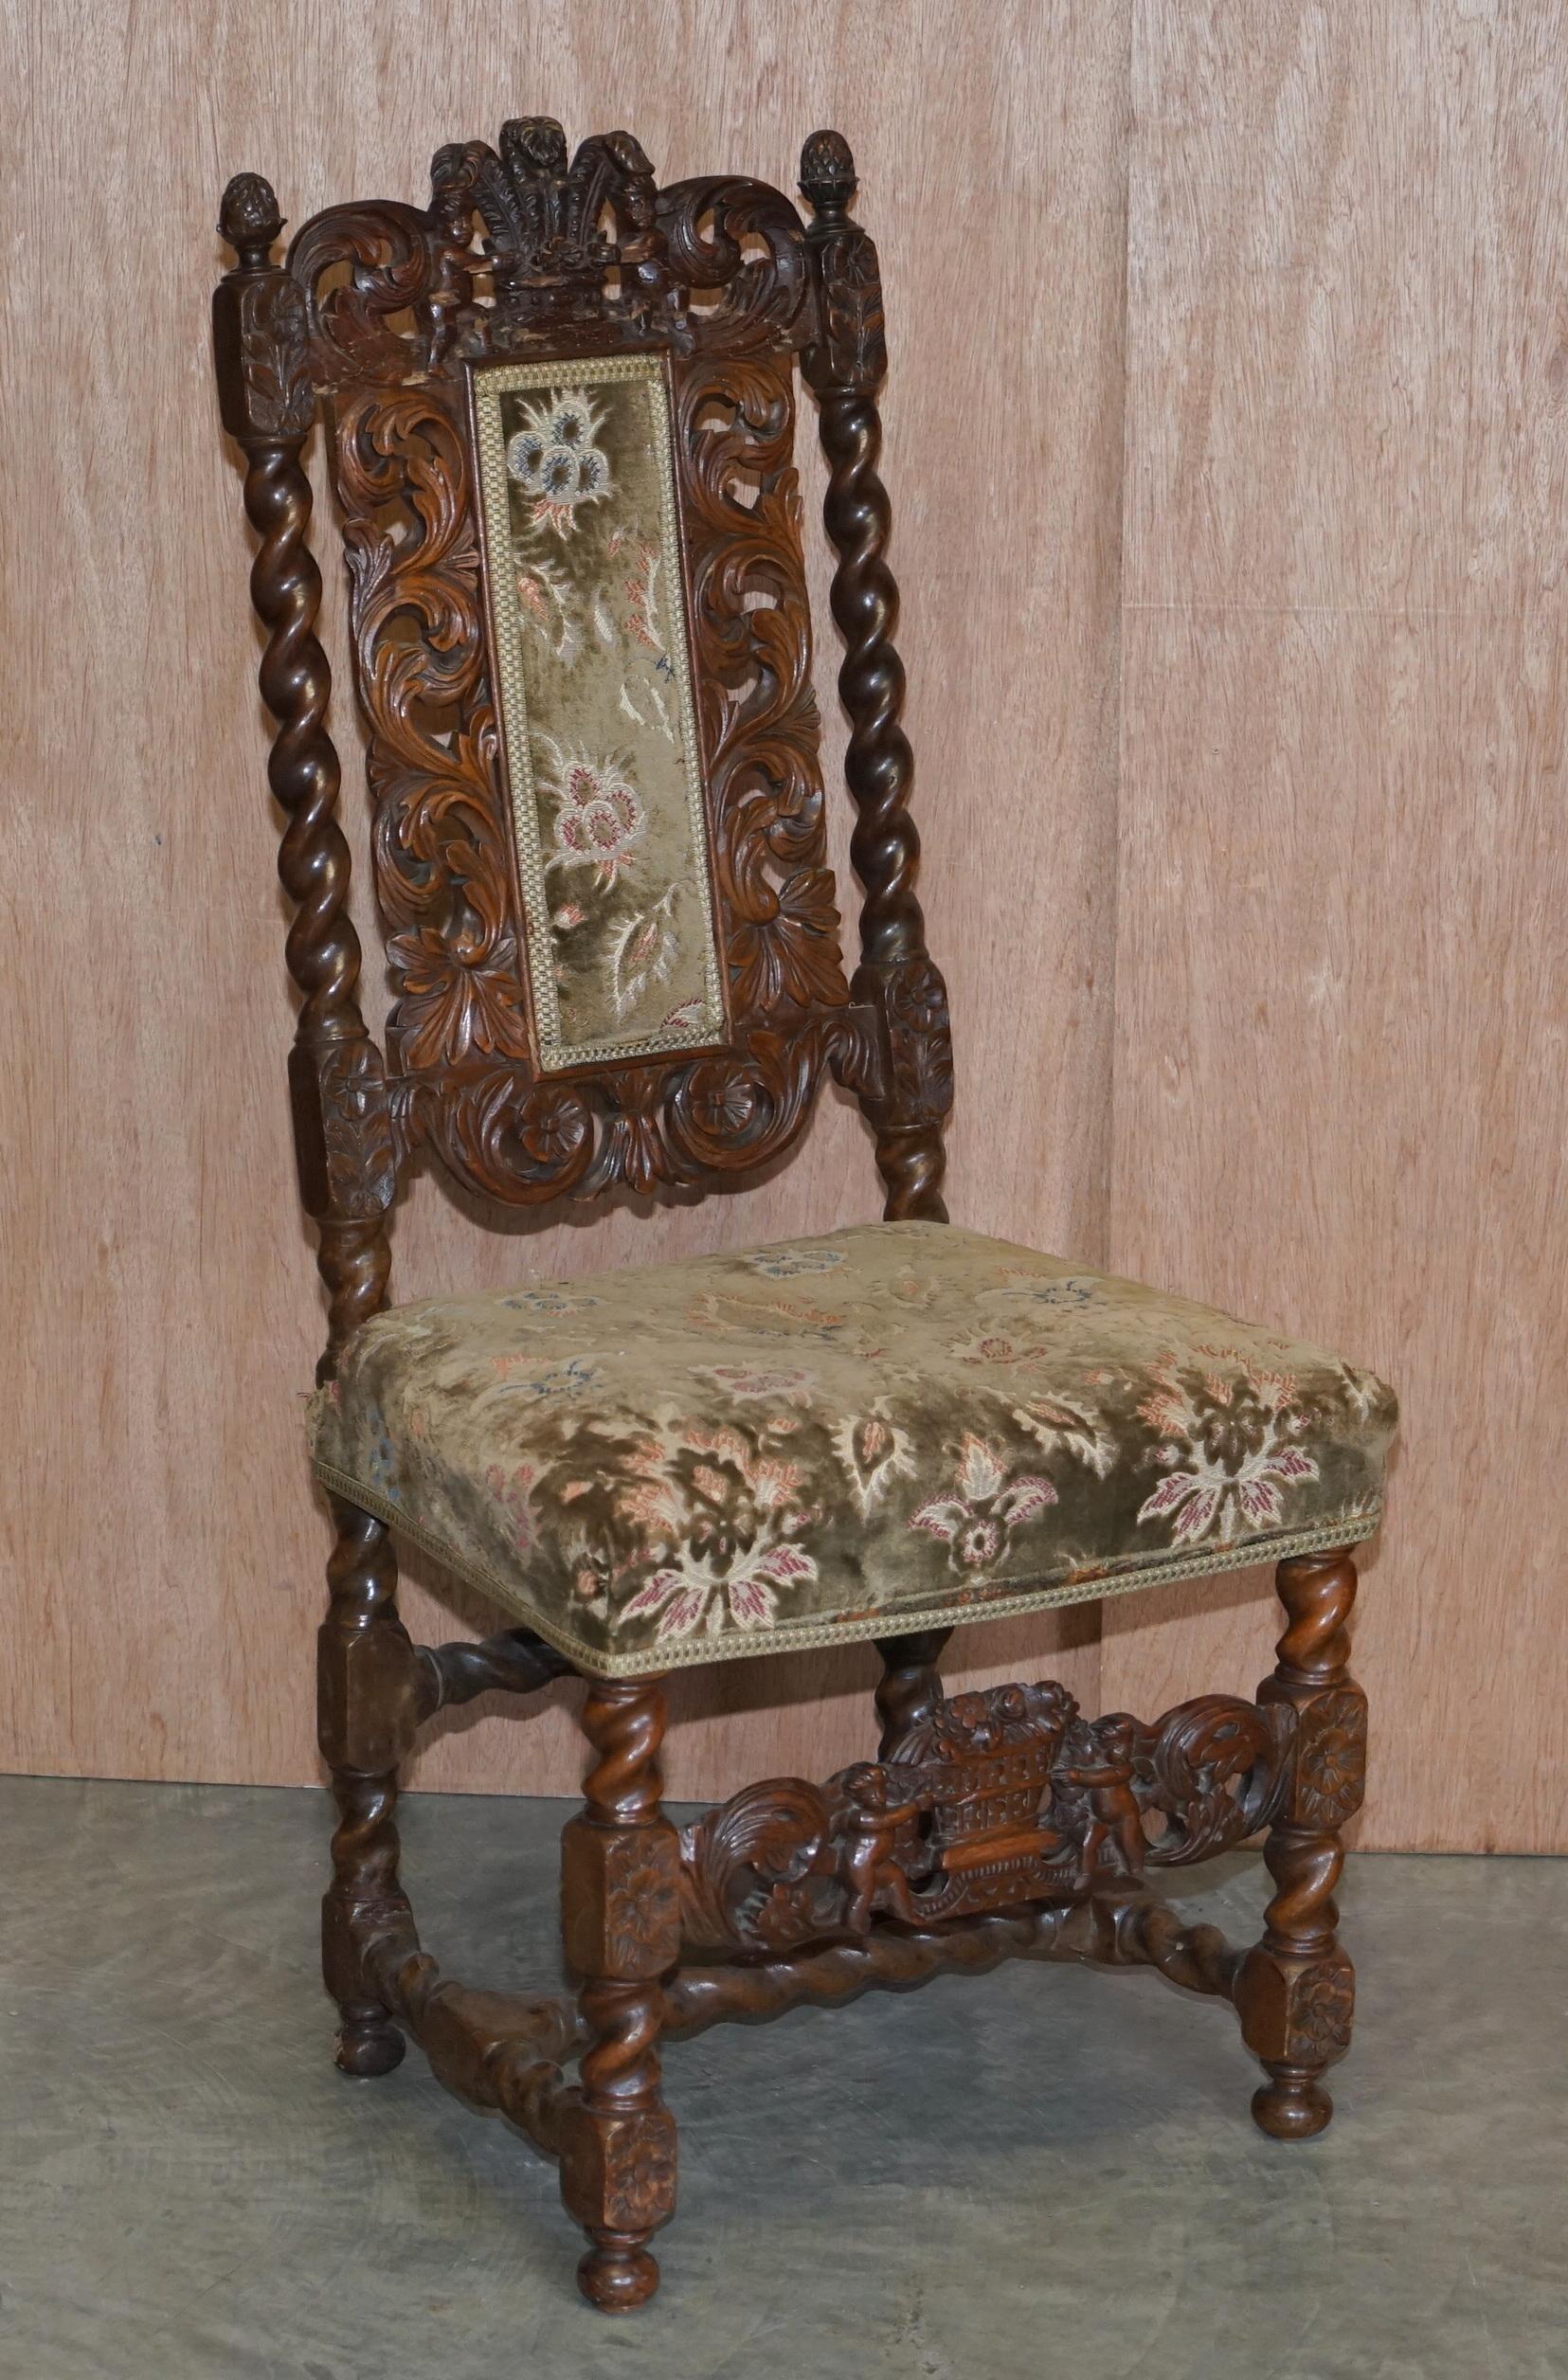 Pair of 18th Century Fruit Wood Carved Chair Cherubs Holding a Crown and Flowers For Sale 5